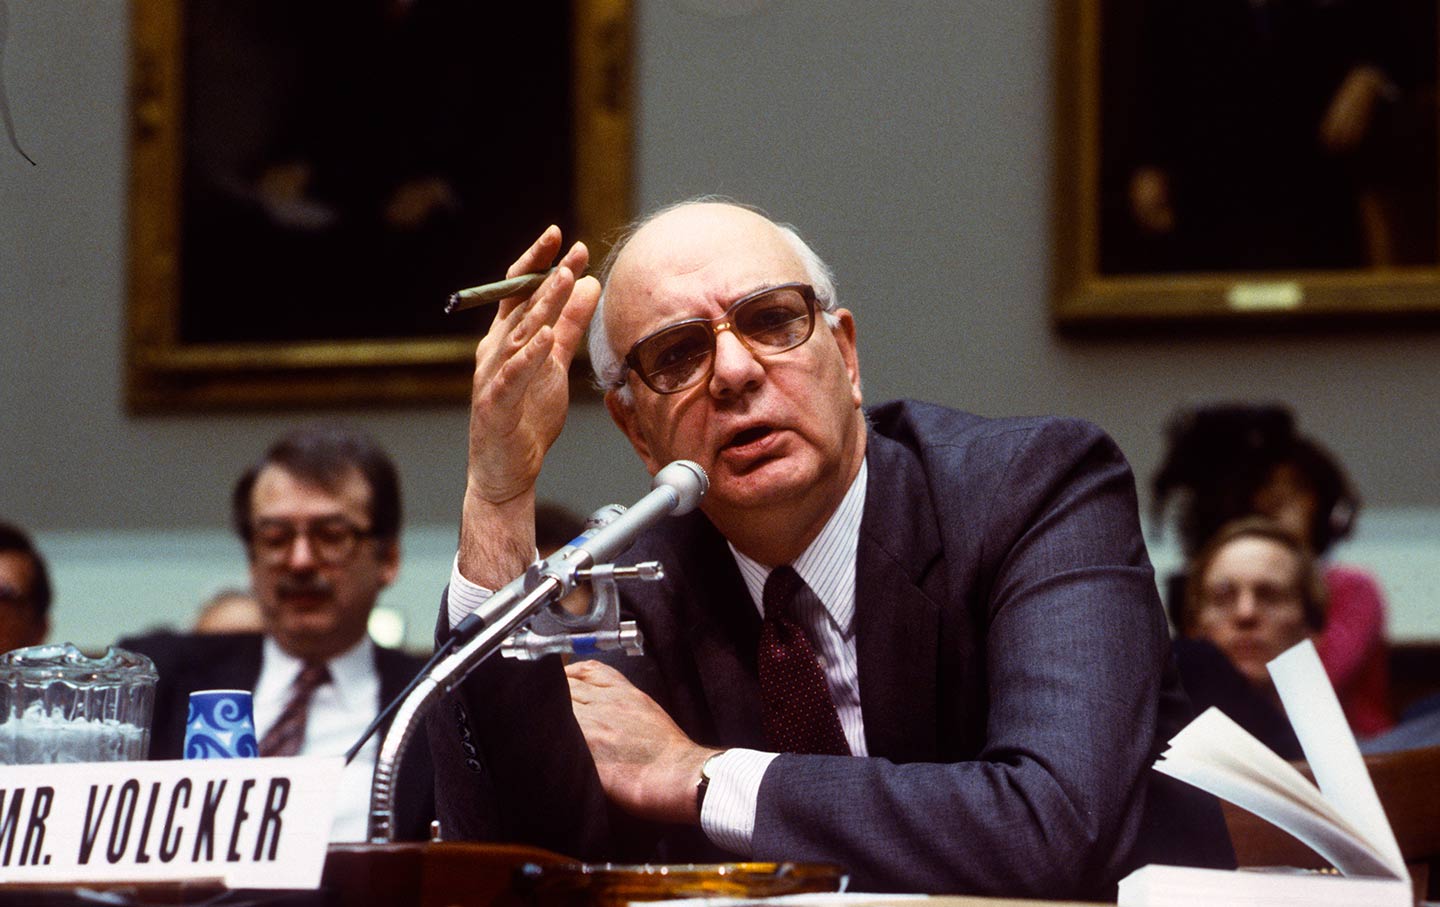 RIP, Paul Volcker: The Fed Chair Who Thought We Lived Too Well